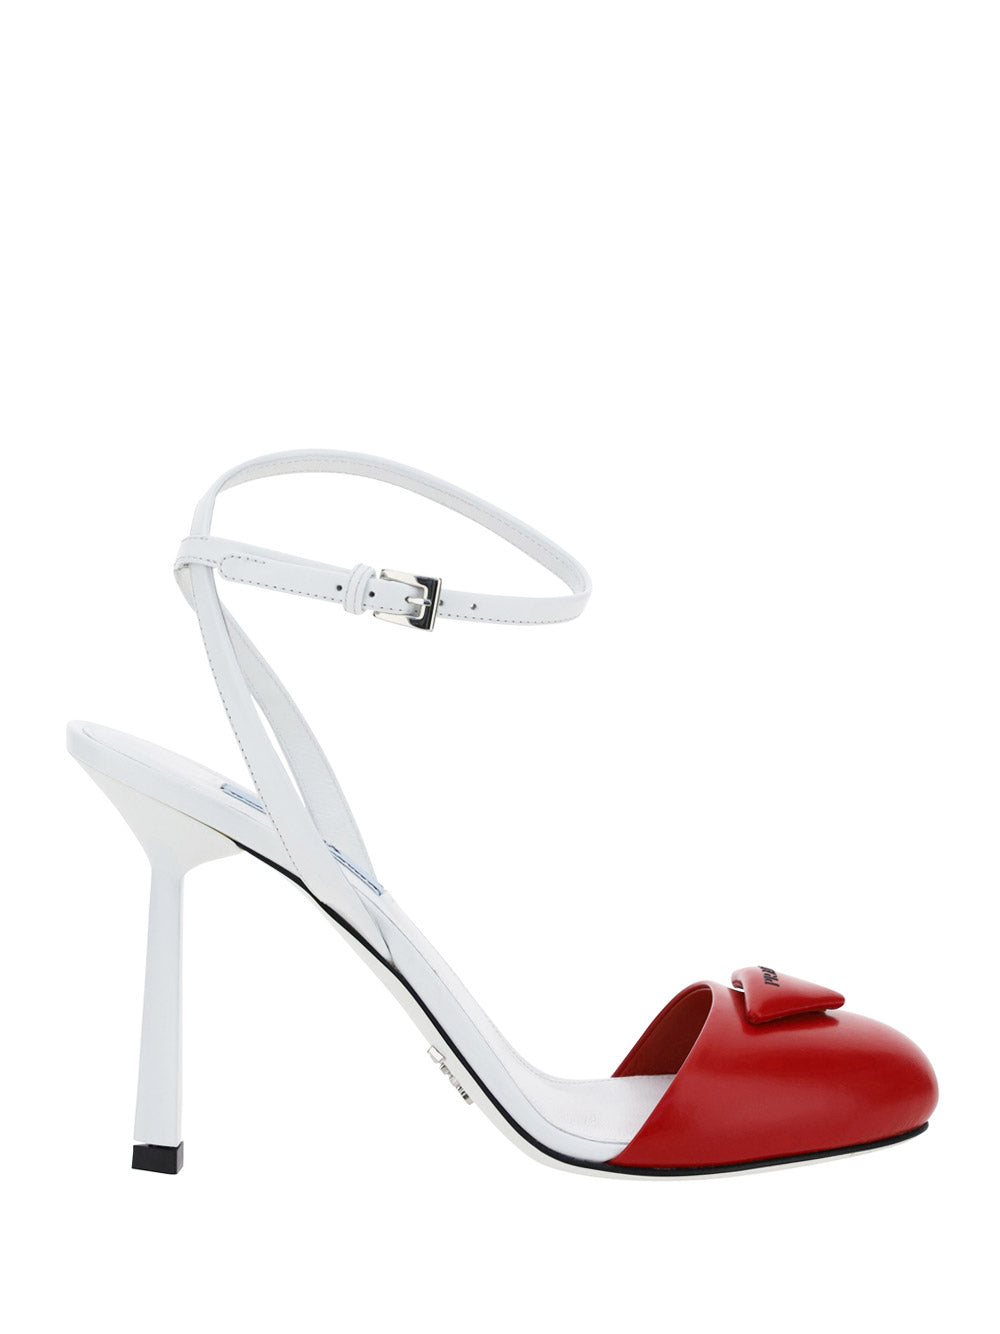 Brushed Leather Pumps - White / Red